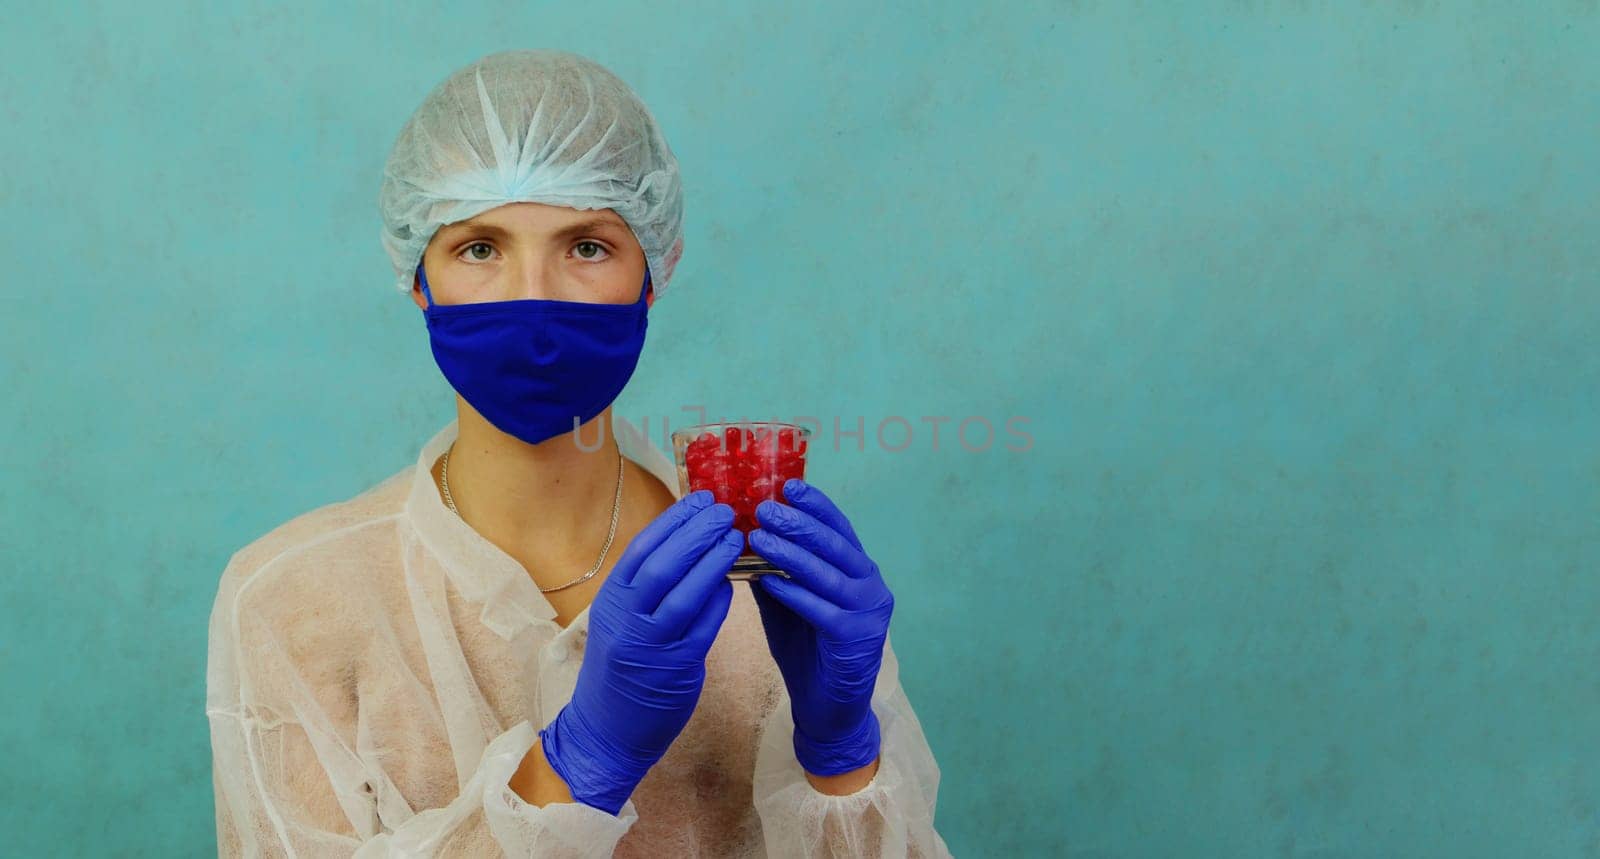 Healthy lifestyle and young people, vitamins and food Supplements. Studio portrait of a teenager in a medical gown wearing blue gloves and a cap holding a glass full of red pills.